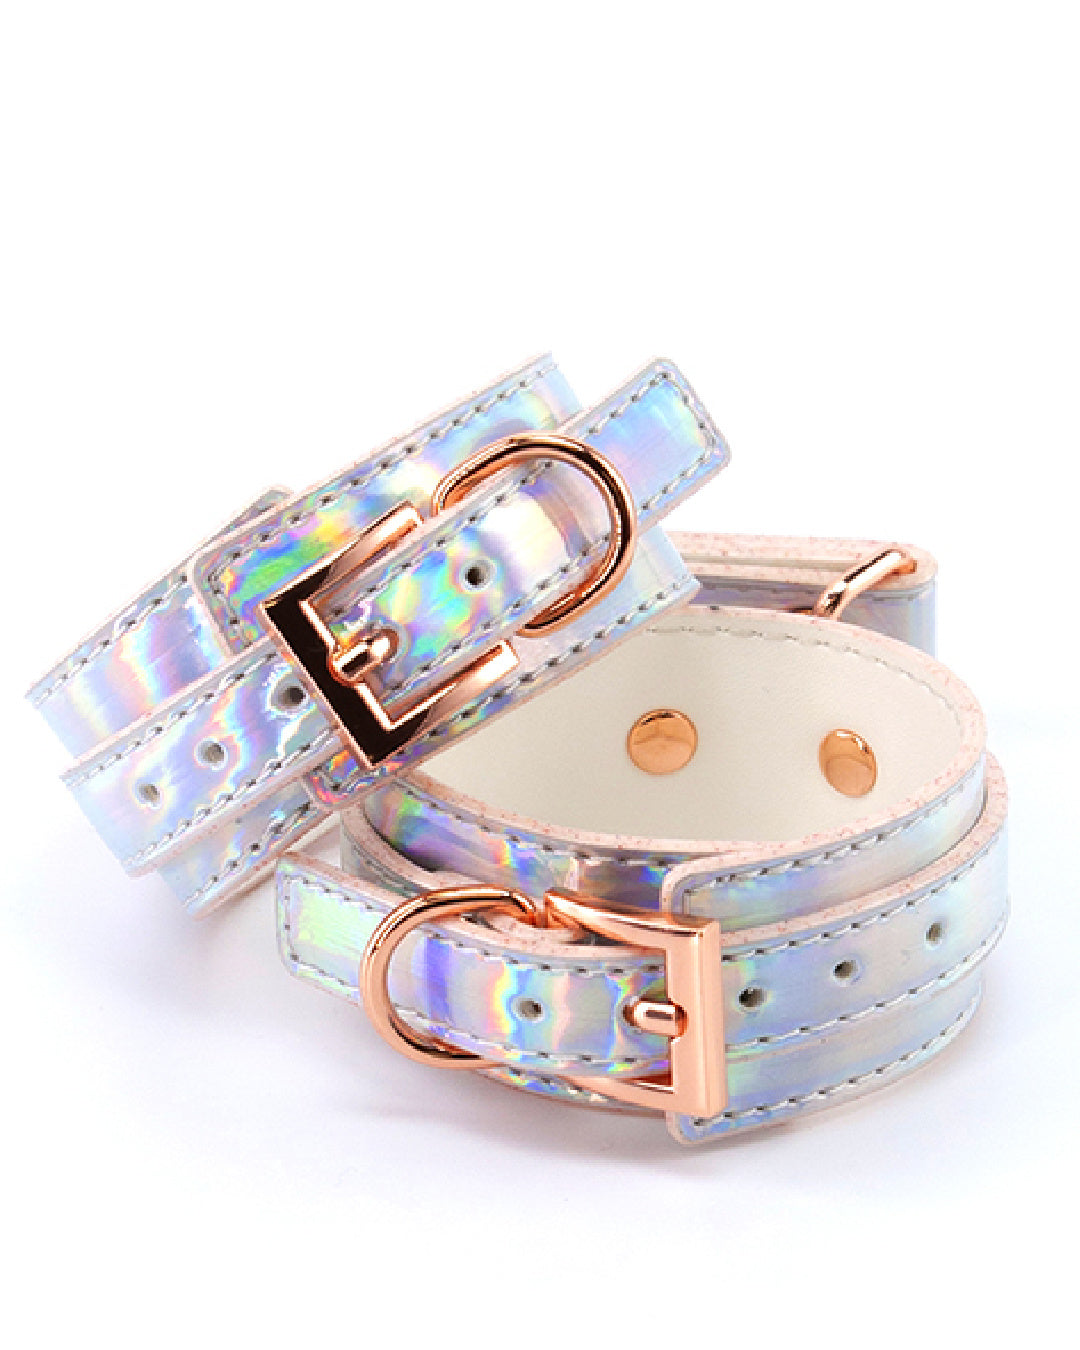 Cosmo Bondage Holographic Ankle Cuffs sitting on top of each other on white background 